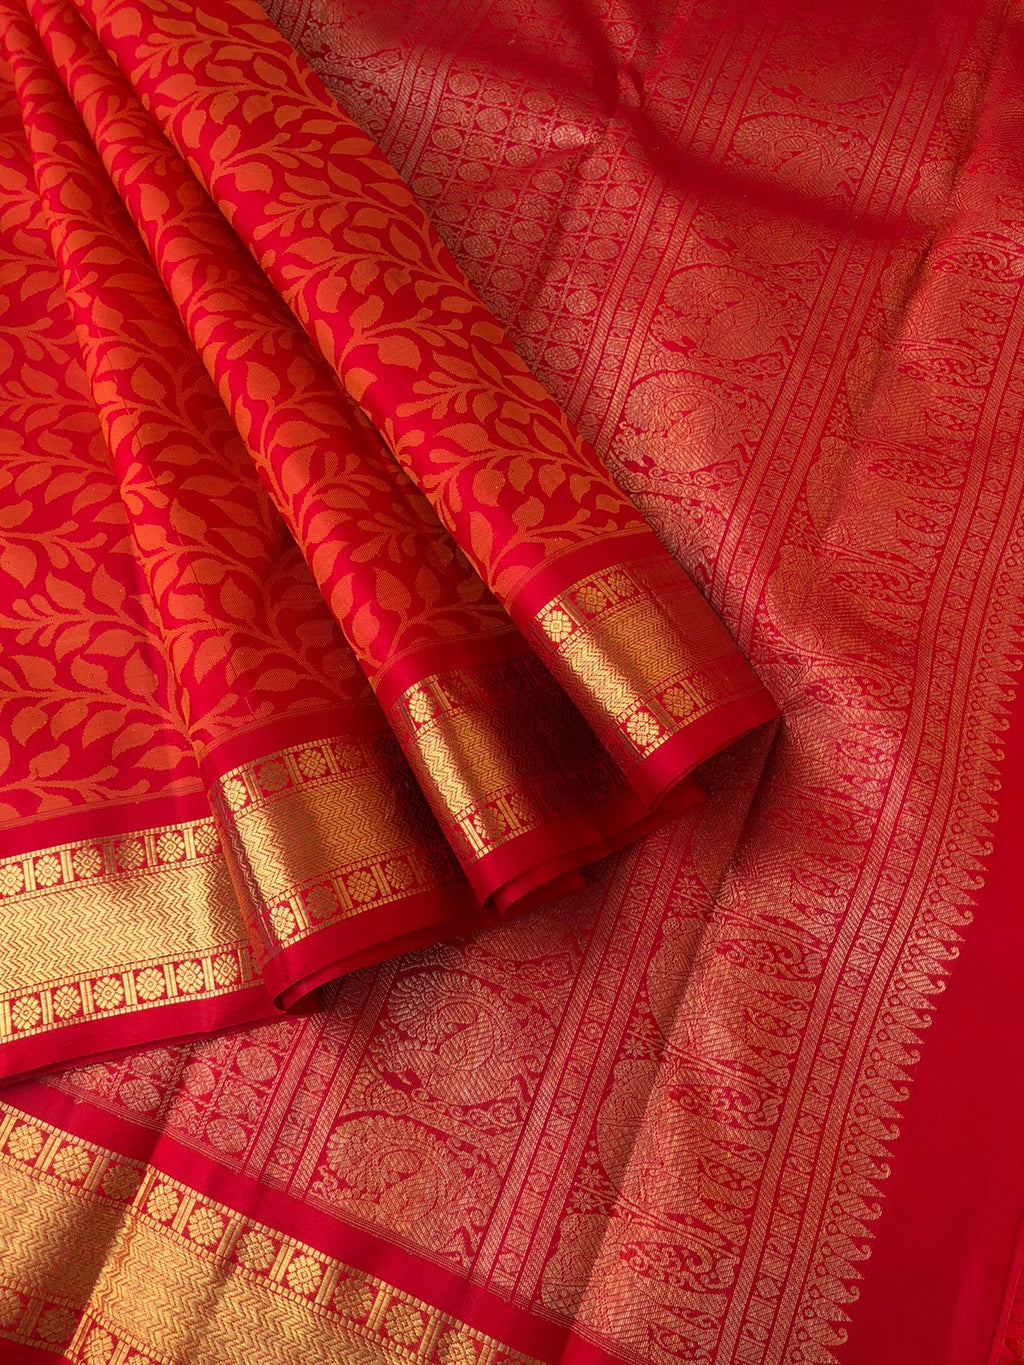 Yarn Play on Kanchivaram - the beautiful of deep red and gold with leave motifs woven all over the body